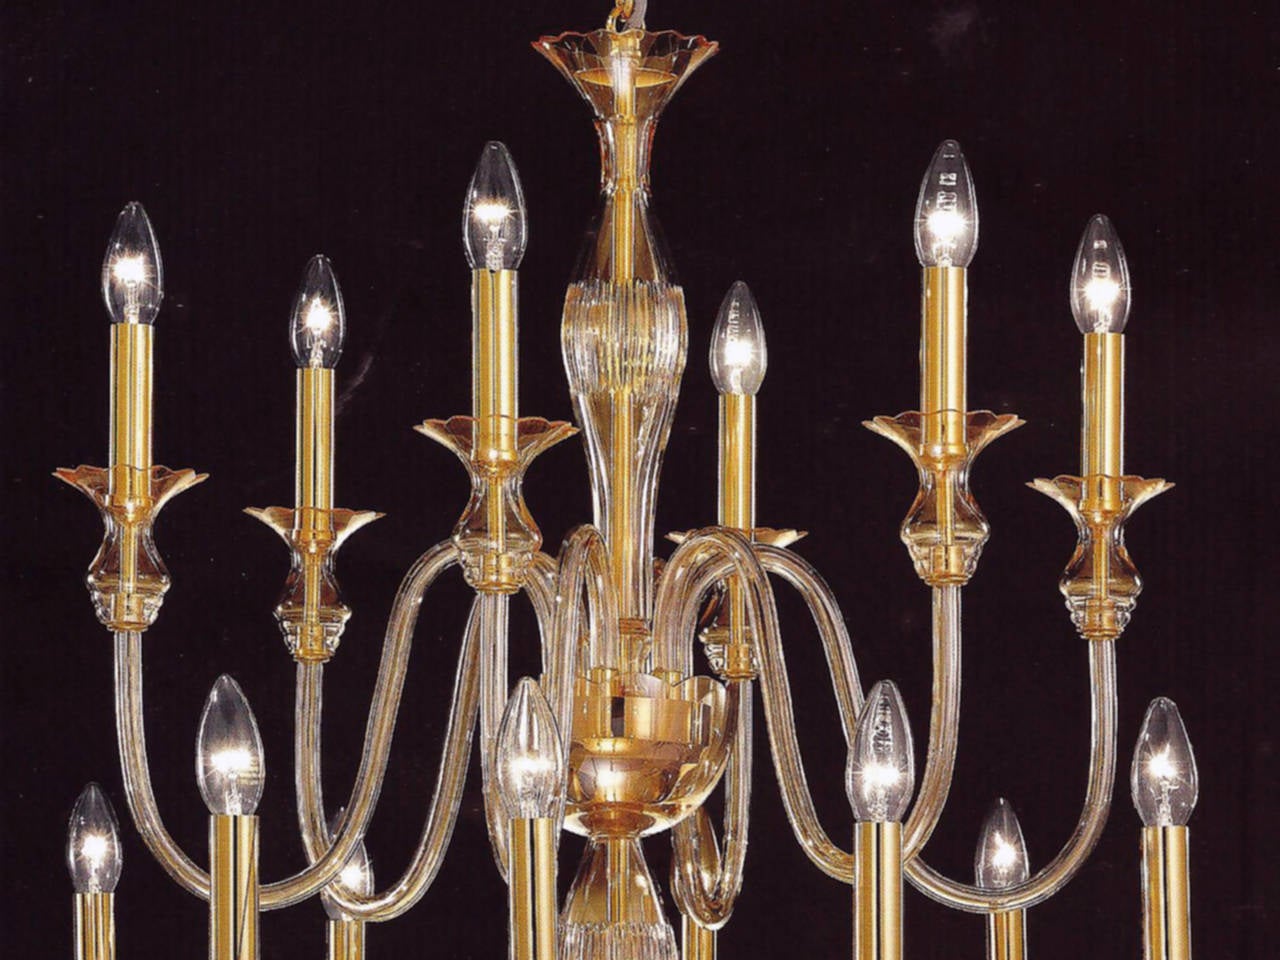 Custom Modern Neoclassical Murano / Venetian Glass Double Tier Chandeliers In Excellent Condition For Sale In New York, NY